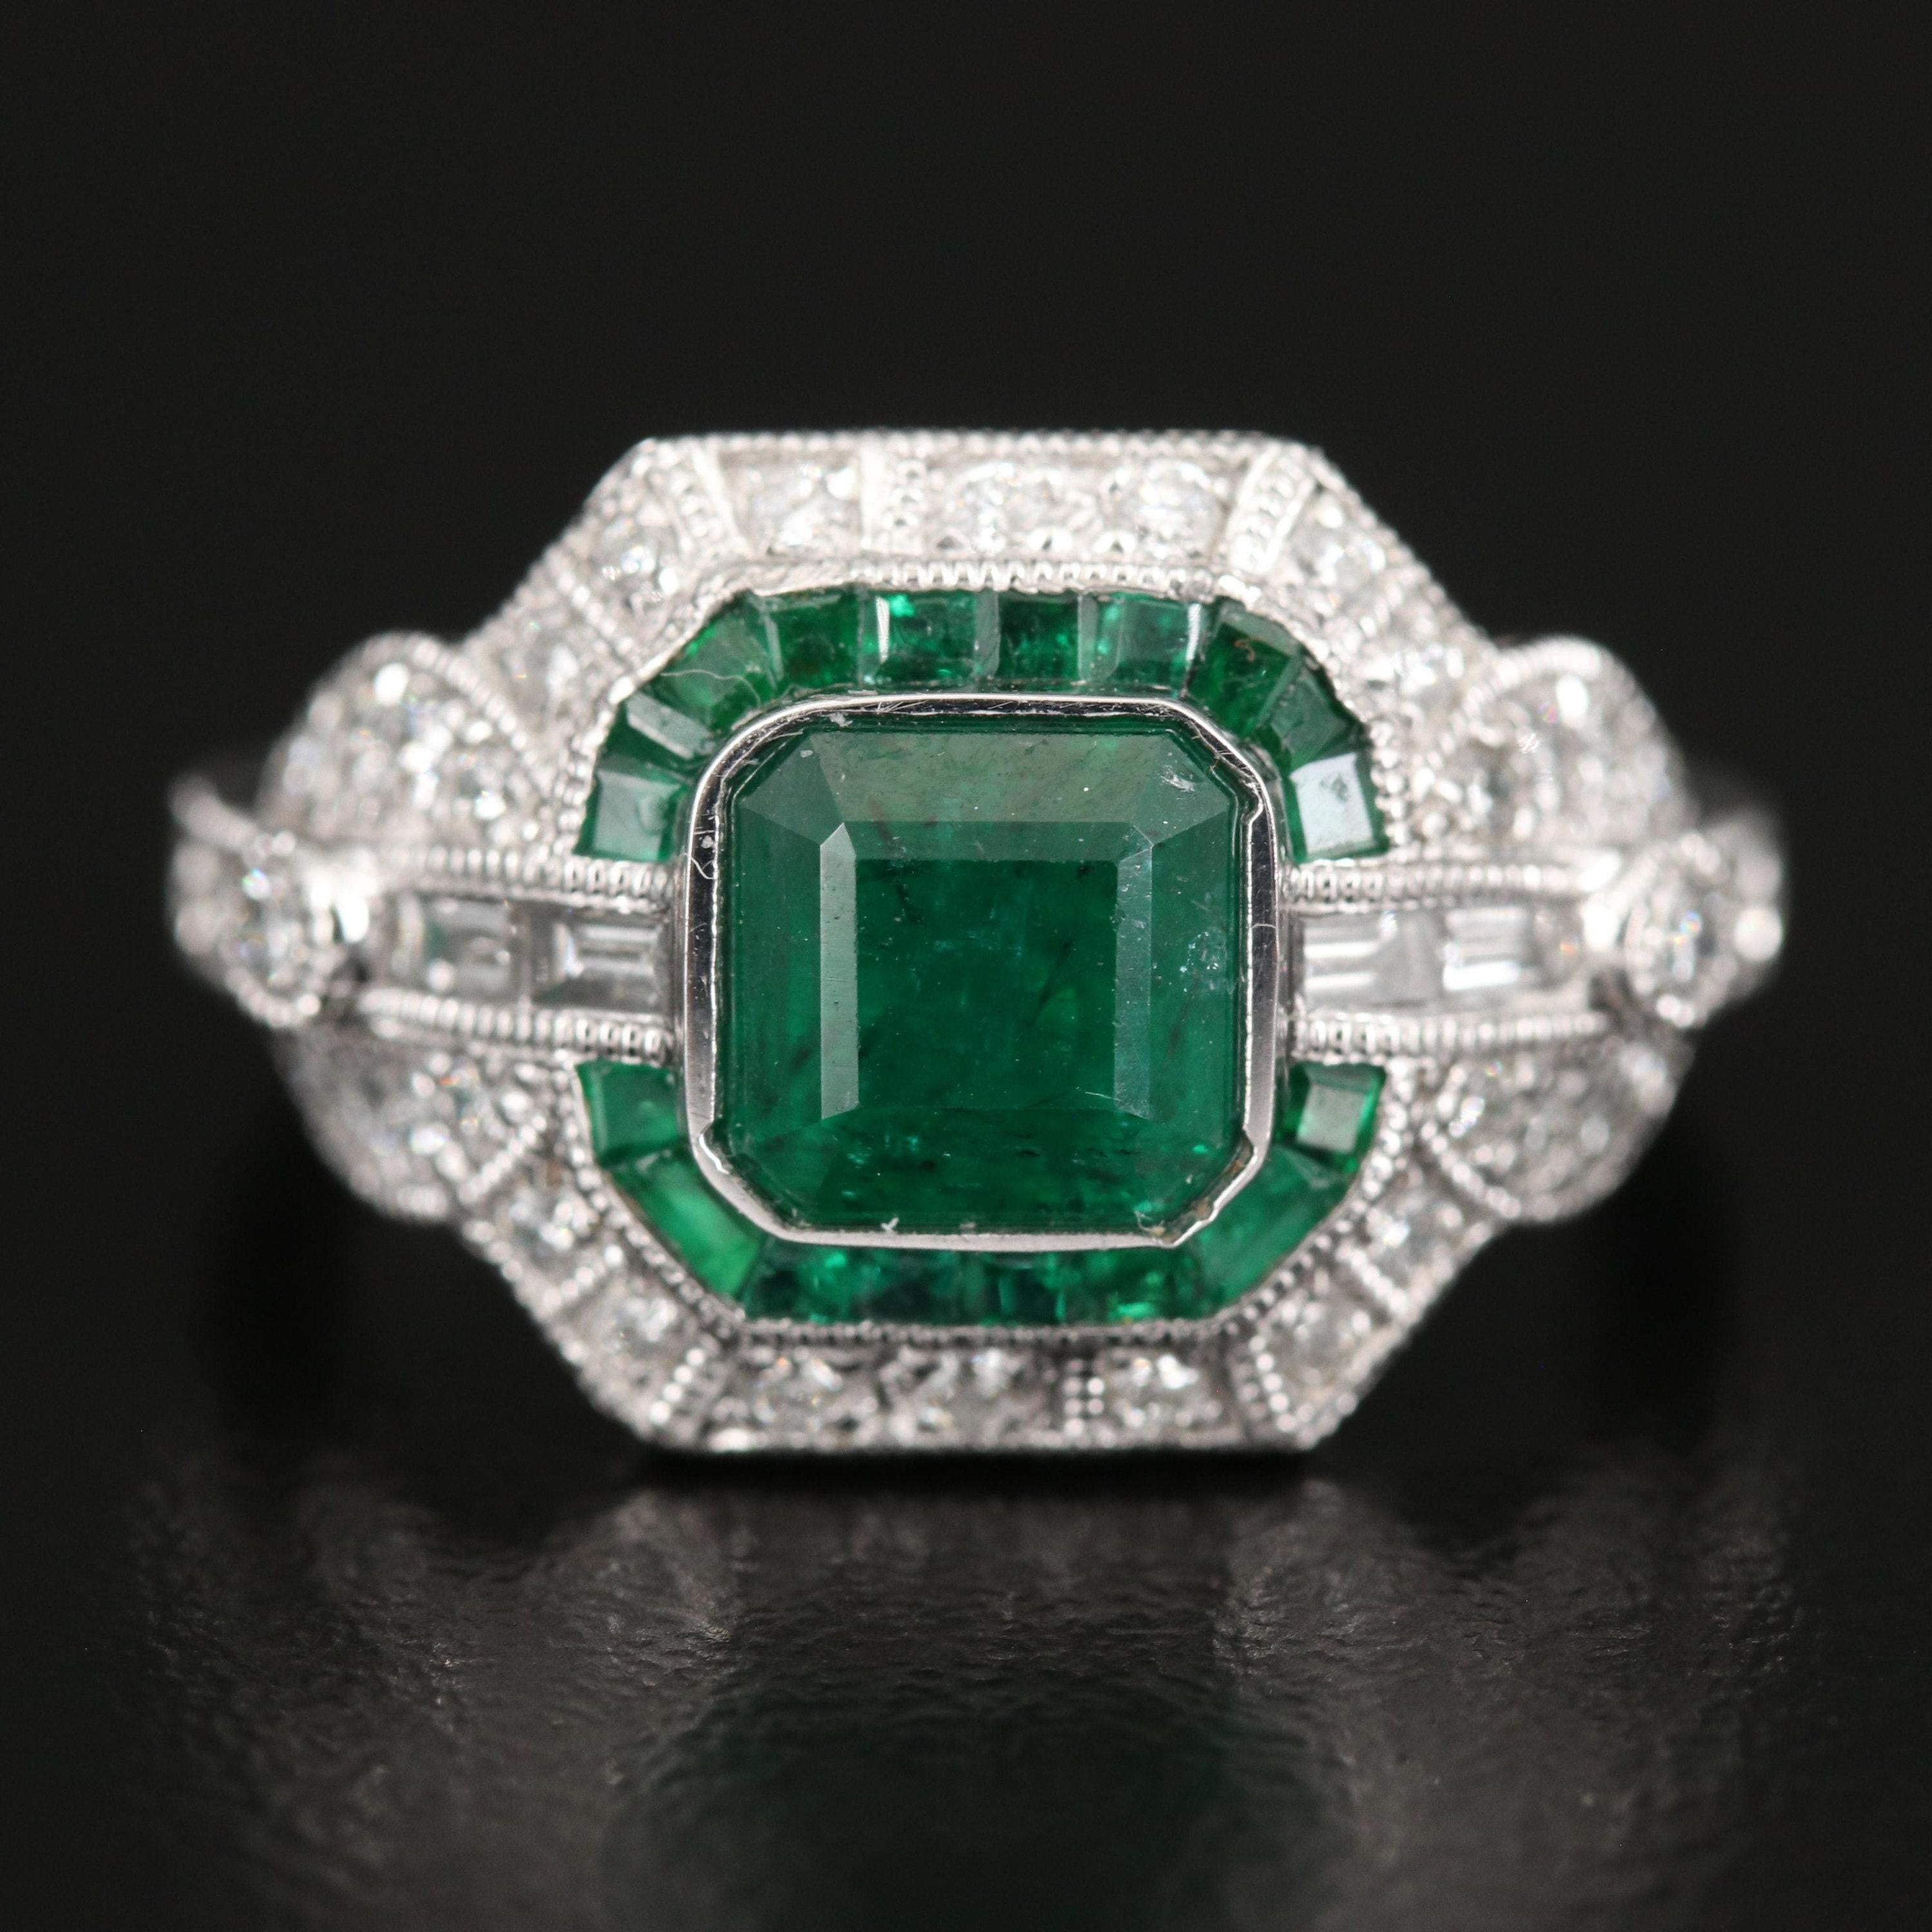 For Sale:  Vintage 4.2 Carat Emerald Diamond Engagement Ring, Cluster Diamond Cocktail Ring 7